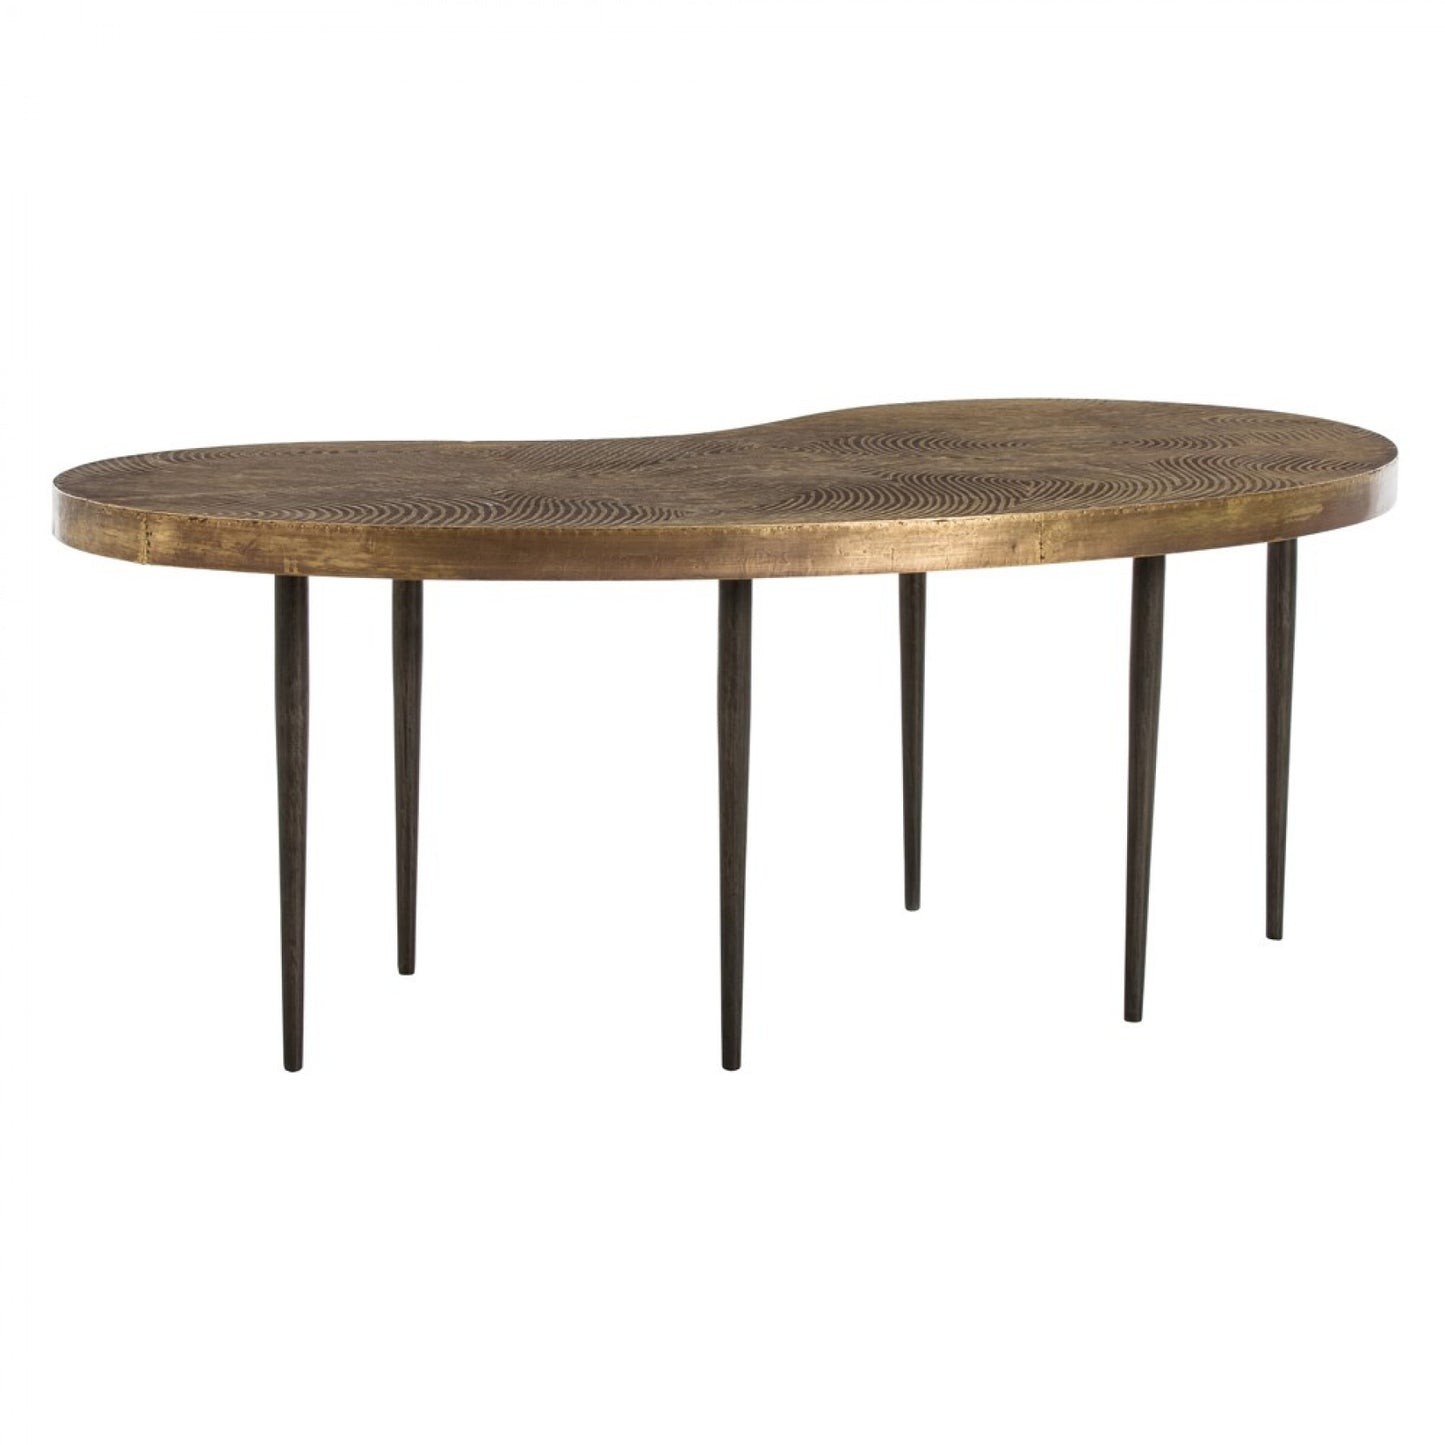 Sloan Cocktail Table